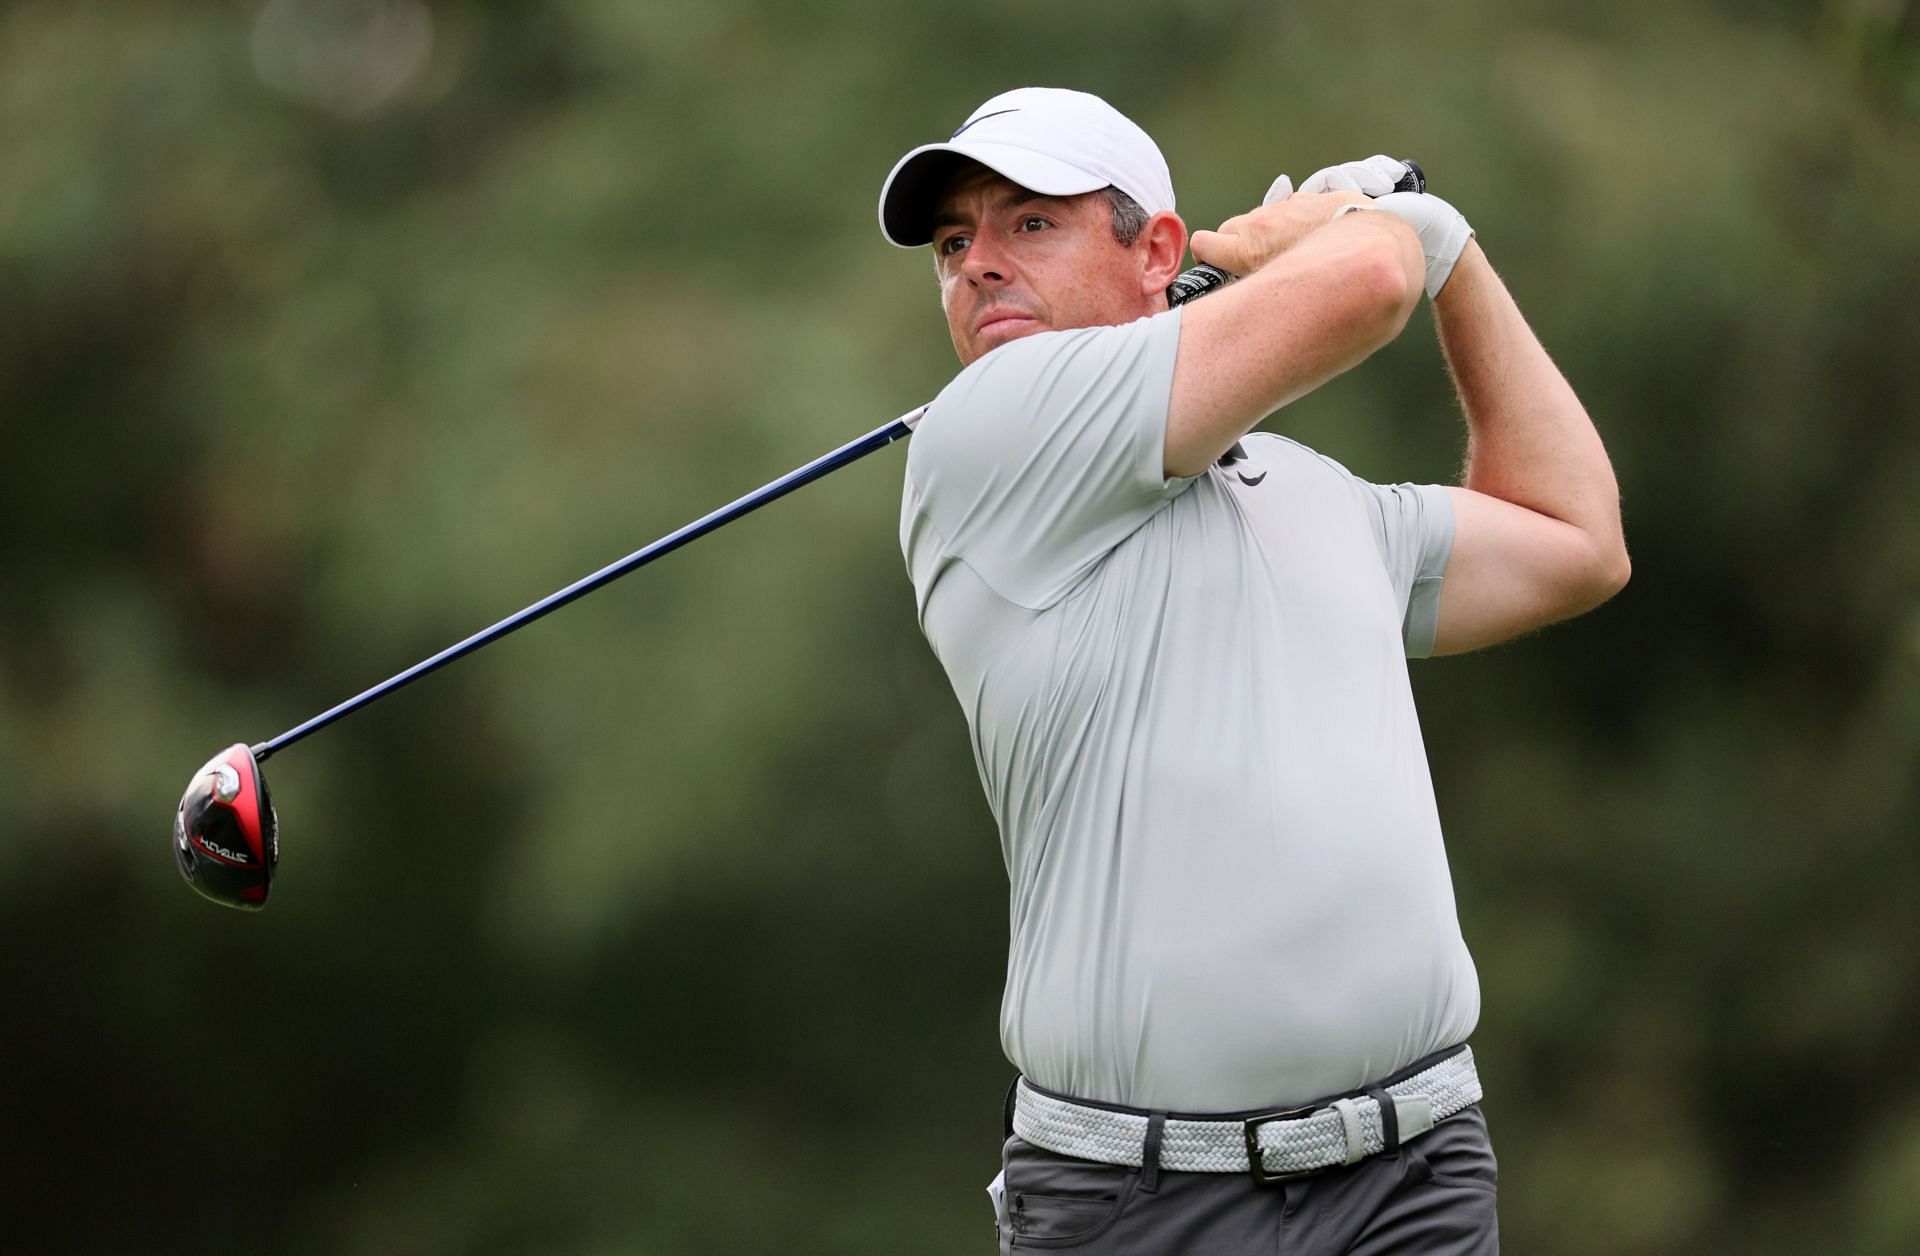 Rory McIlroy plays his shot from the seventh tee during the first round of the 2023 FedEx St. Jude Championship